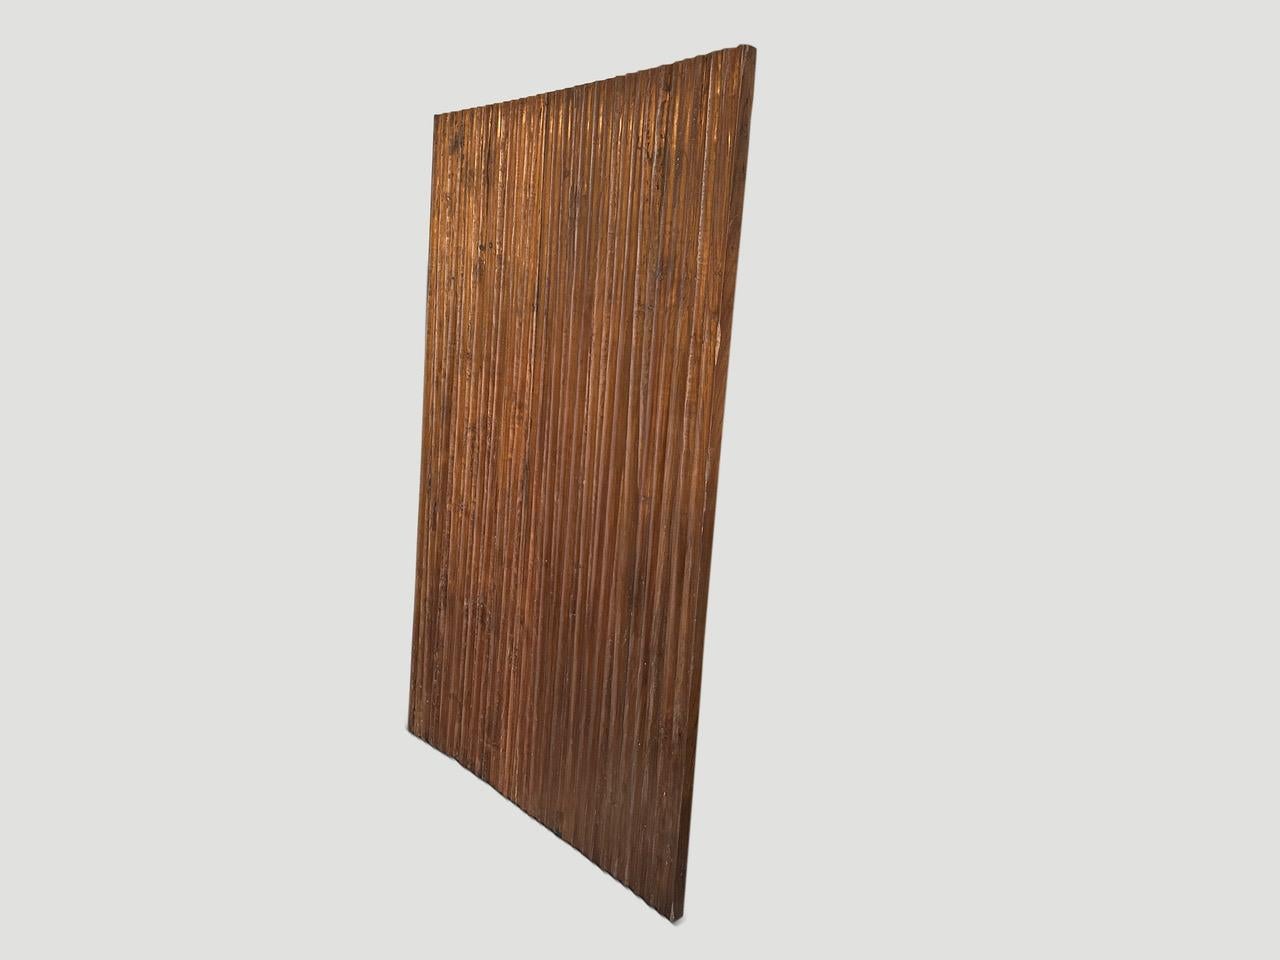 One of a kind antique, hand carved teak wood panel that can be used as a room divider, head board, wall panel or coffee table. We can add a metal or wooden base. Please inquire. Polished with a natural oil revealing the beautiful wood grain.

This